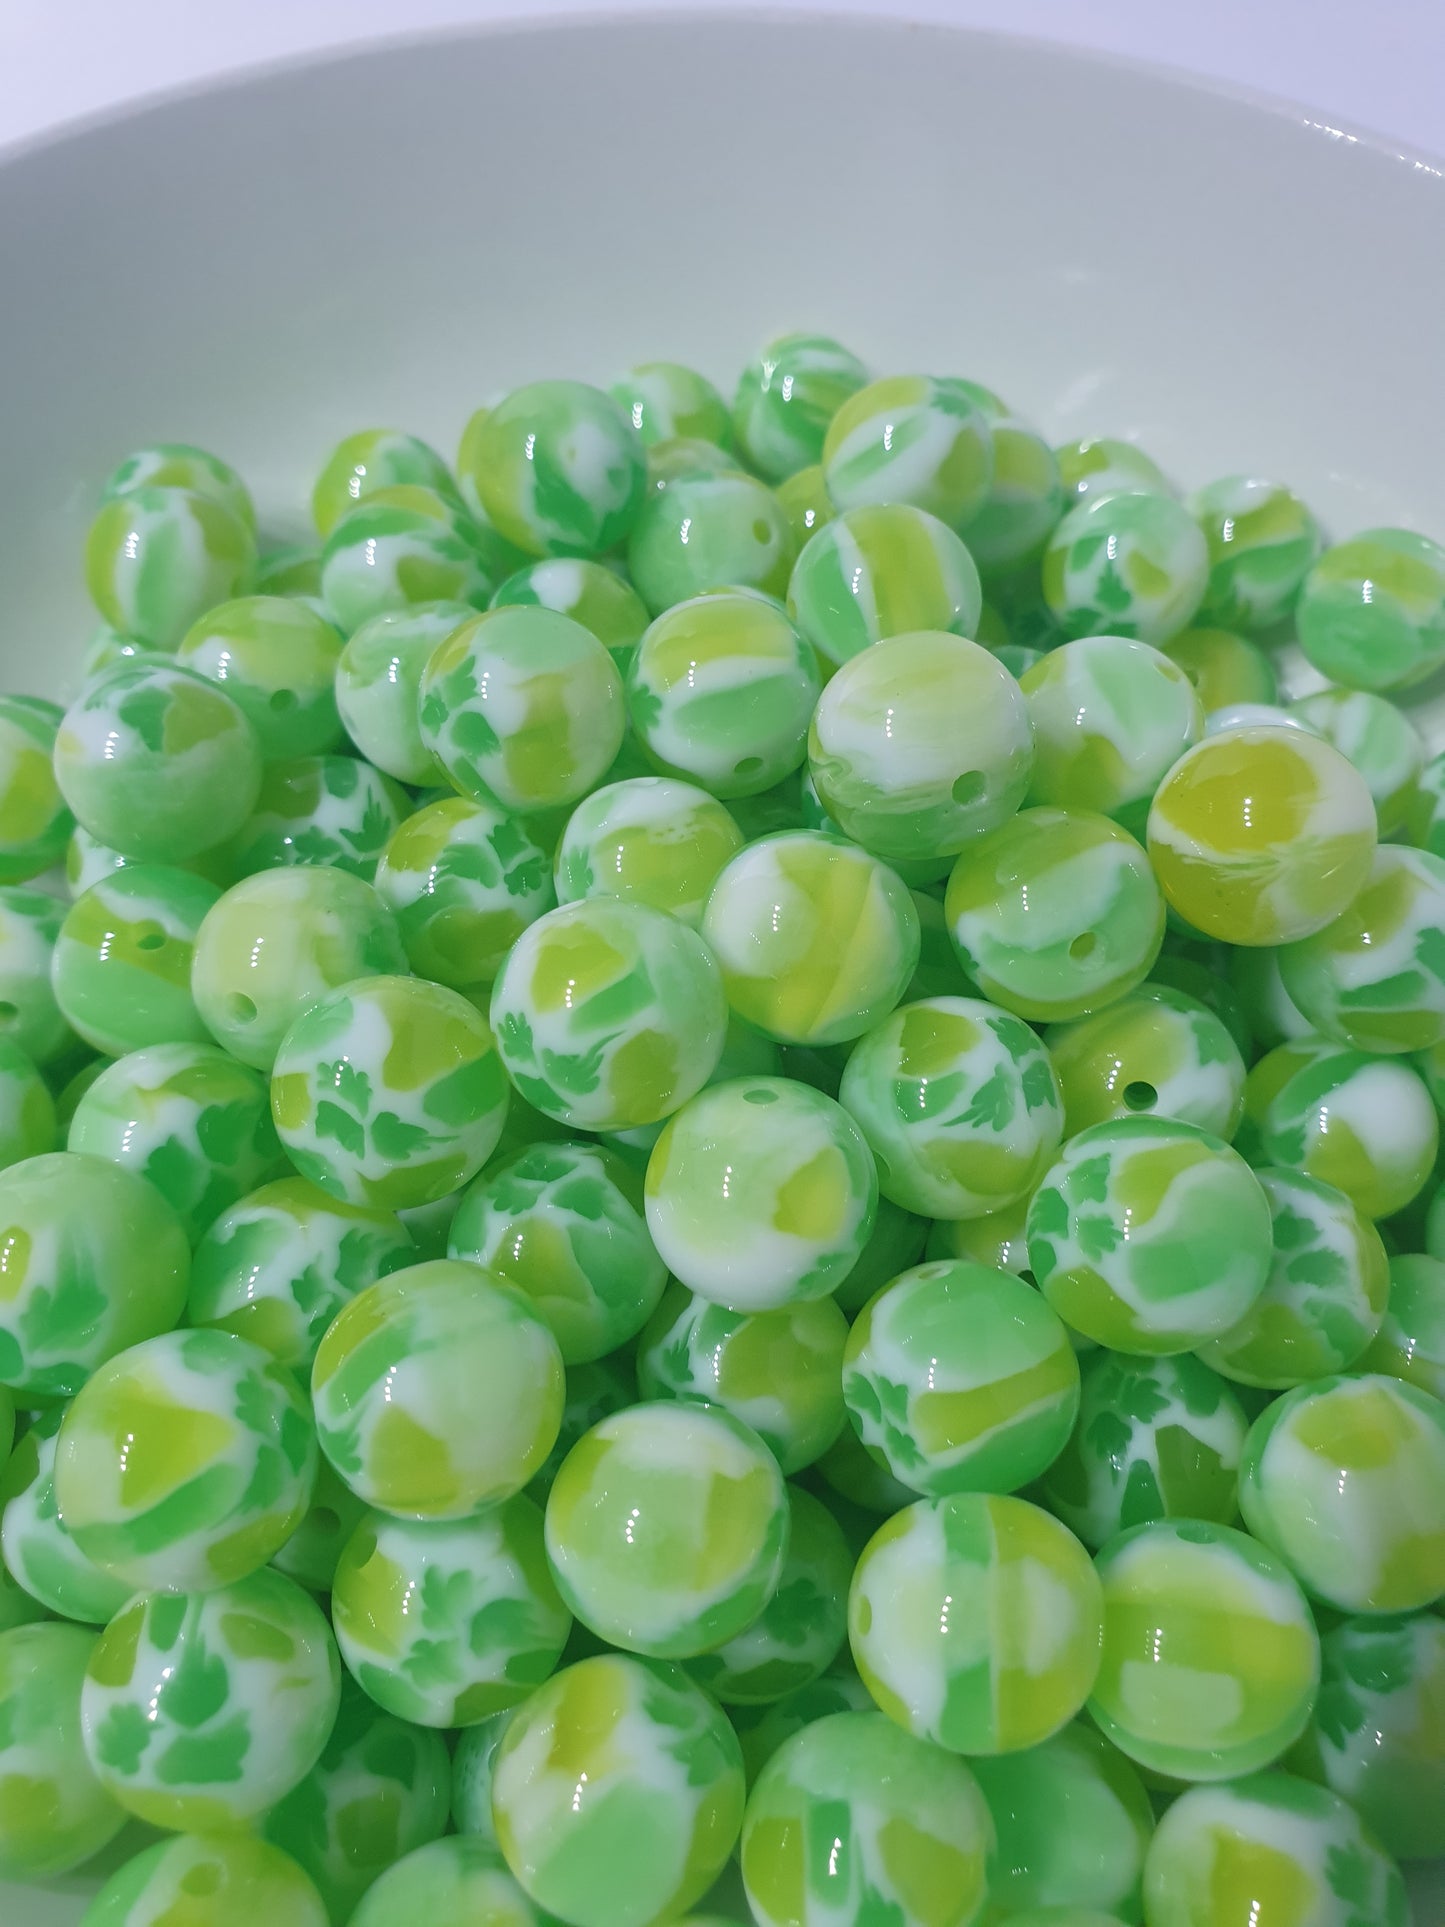 Round Lite Green Jelly Chunk beads. 16mm. Unusual and beautiful for jewellery and beadable blanks.